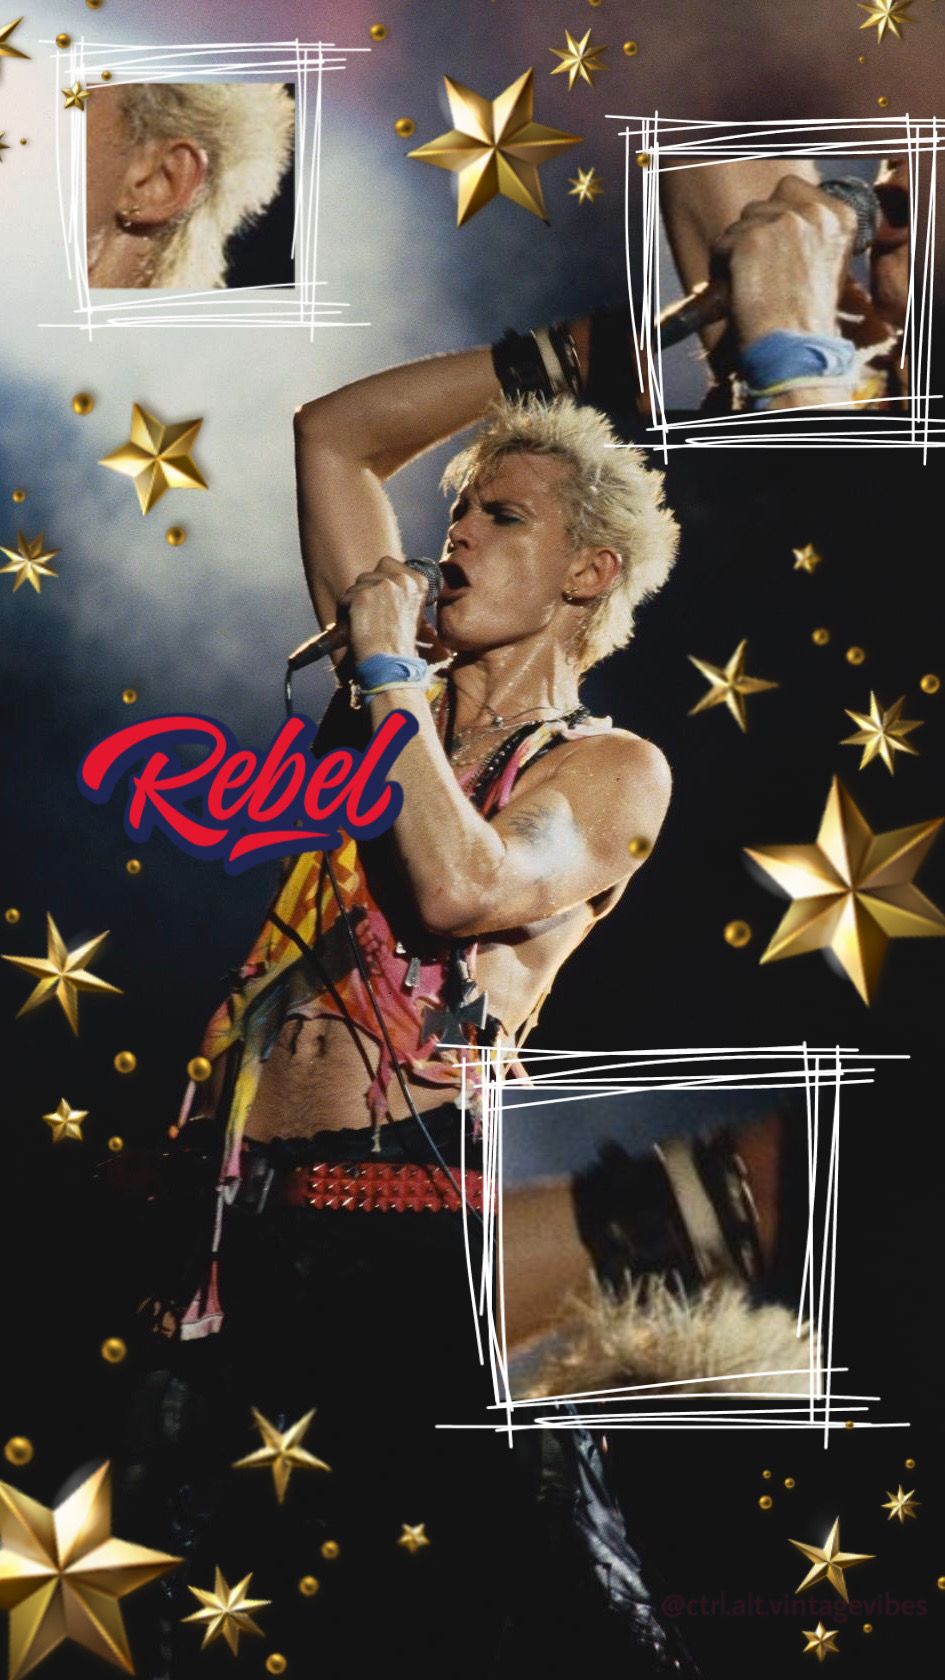 Billy Idol Wallpapers